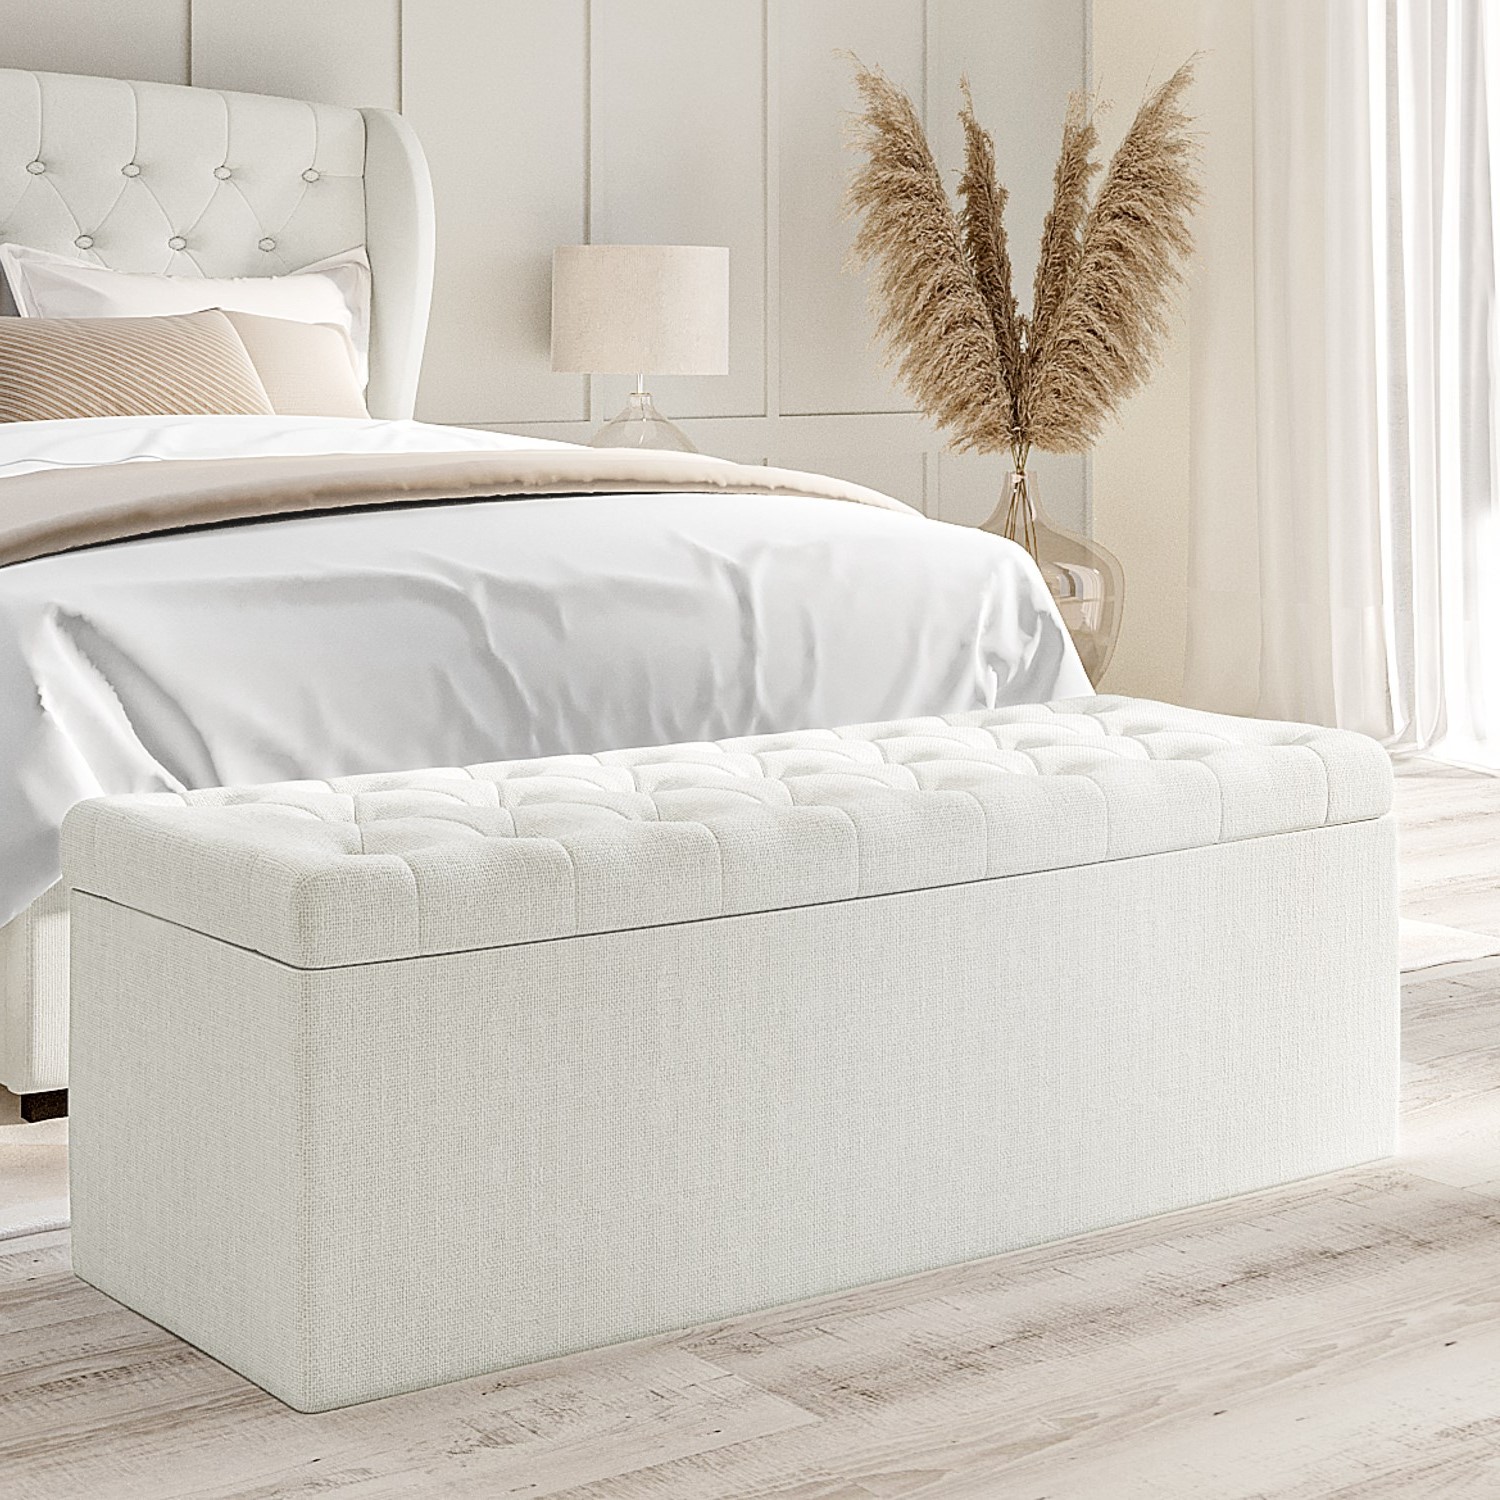 Read more about Cream fabric super king ottoman bed with matching blanket box